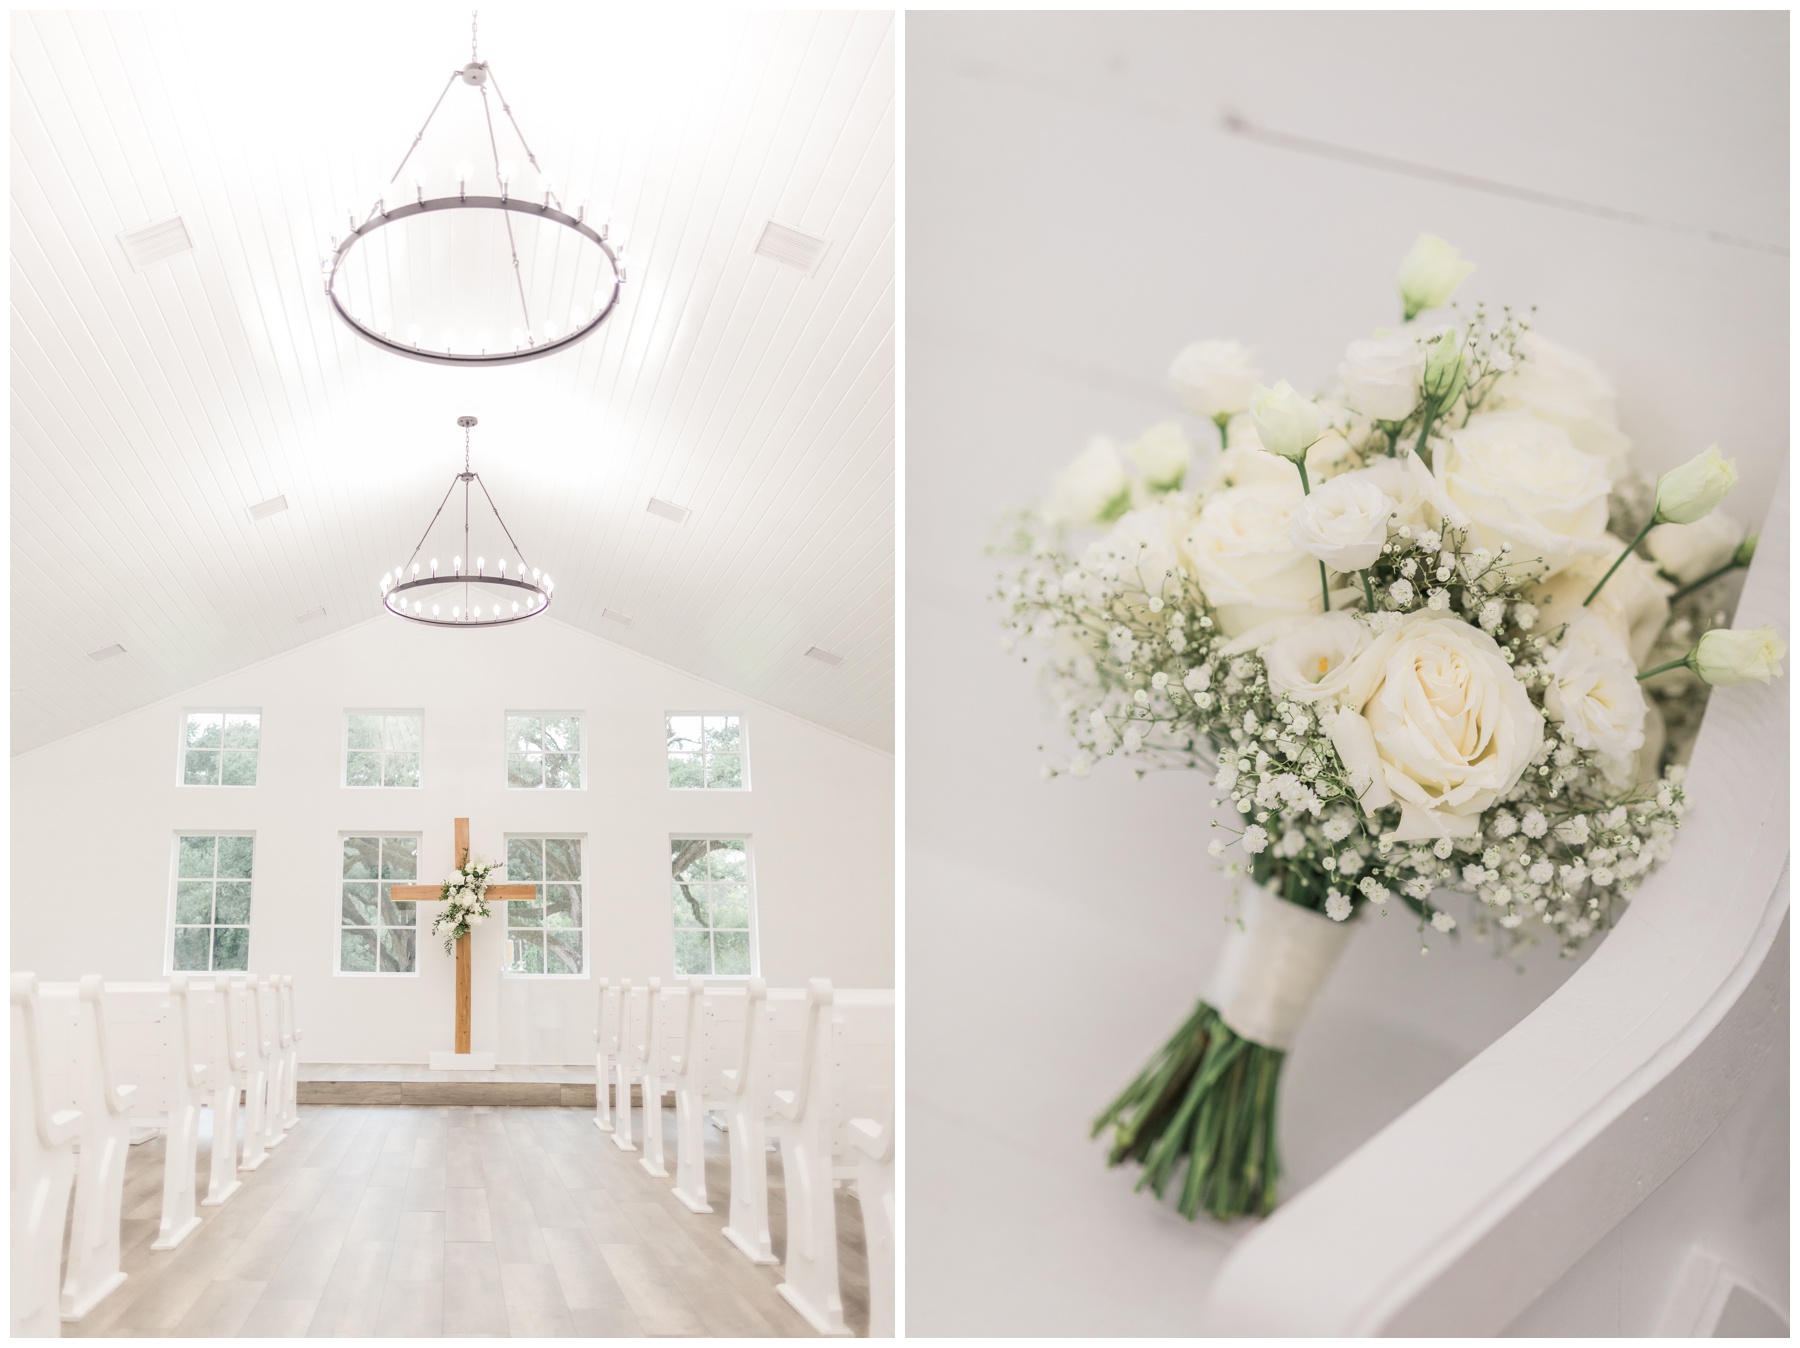 Wooden cross with white roses and baby's breath at a wedding ceremony